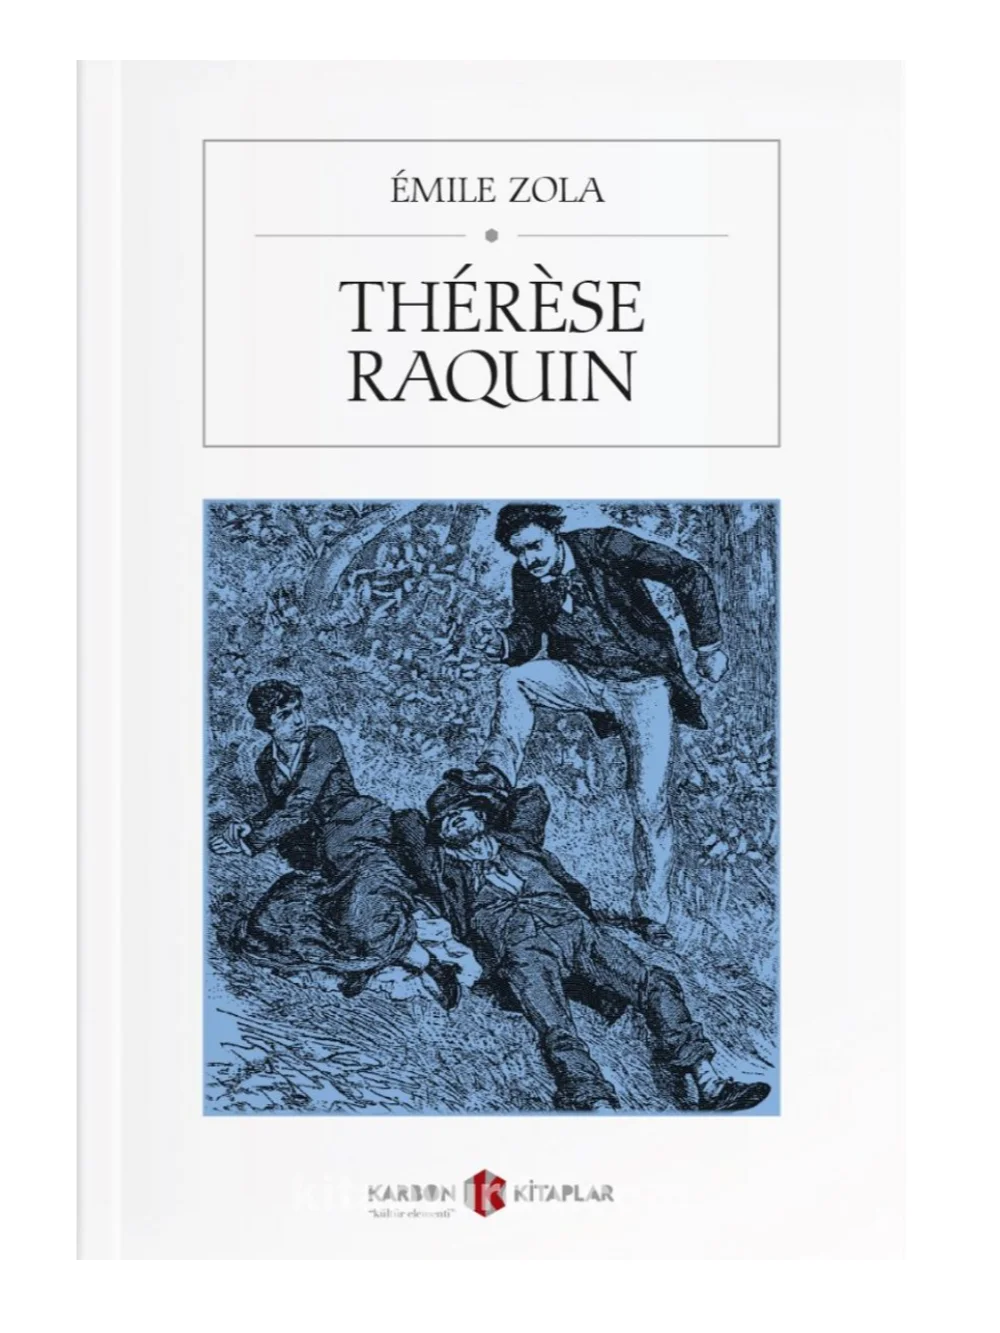 

Therese Raquin - Emile Zola - French book - The best classics of world literature - Nice gift for friends and French learners